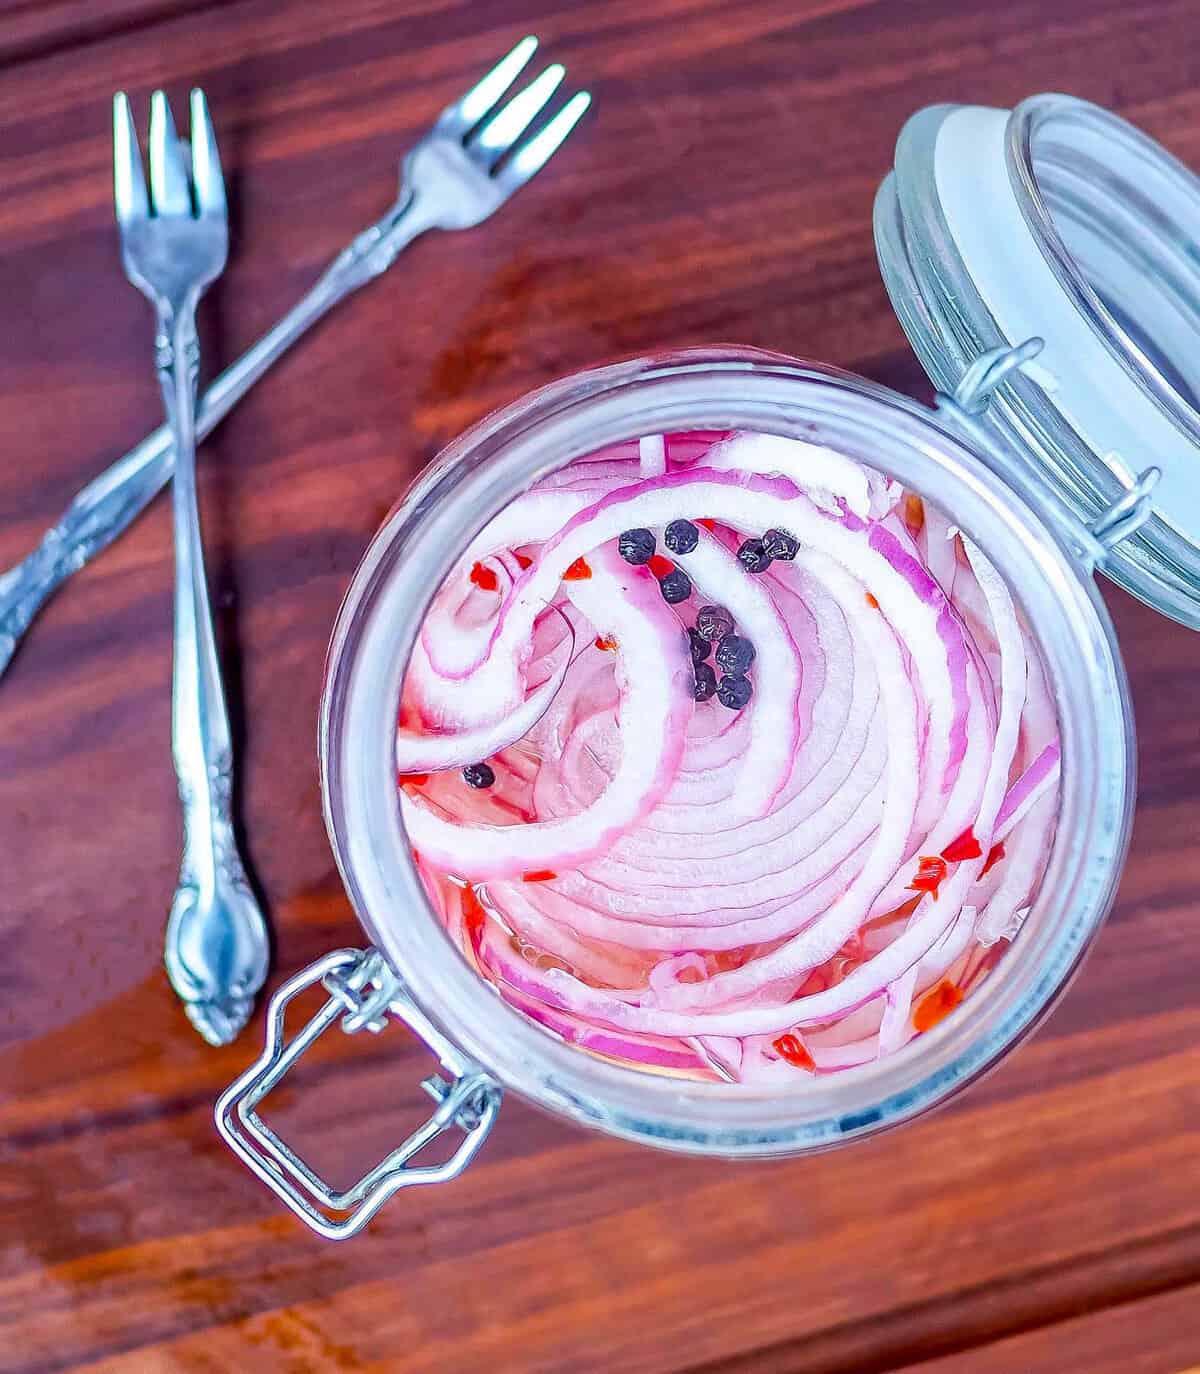 A jar of pickled red onions with peppercorns and two small forks.